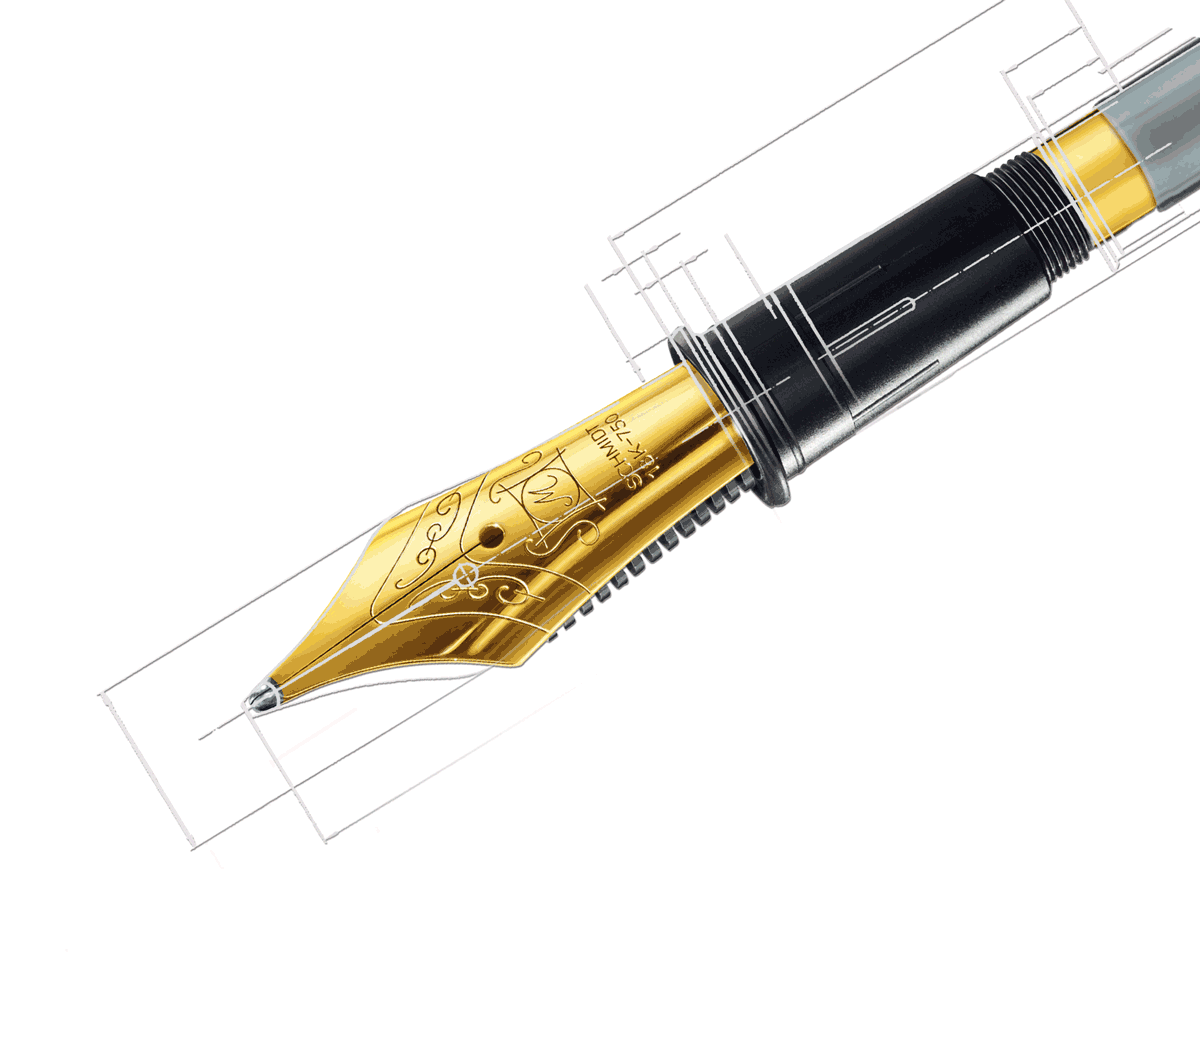 Fountain pen nib for soft writing with ink